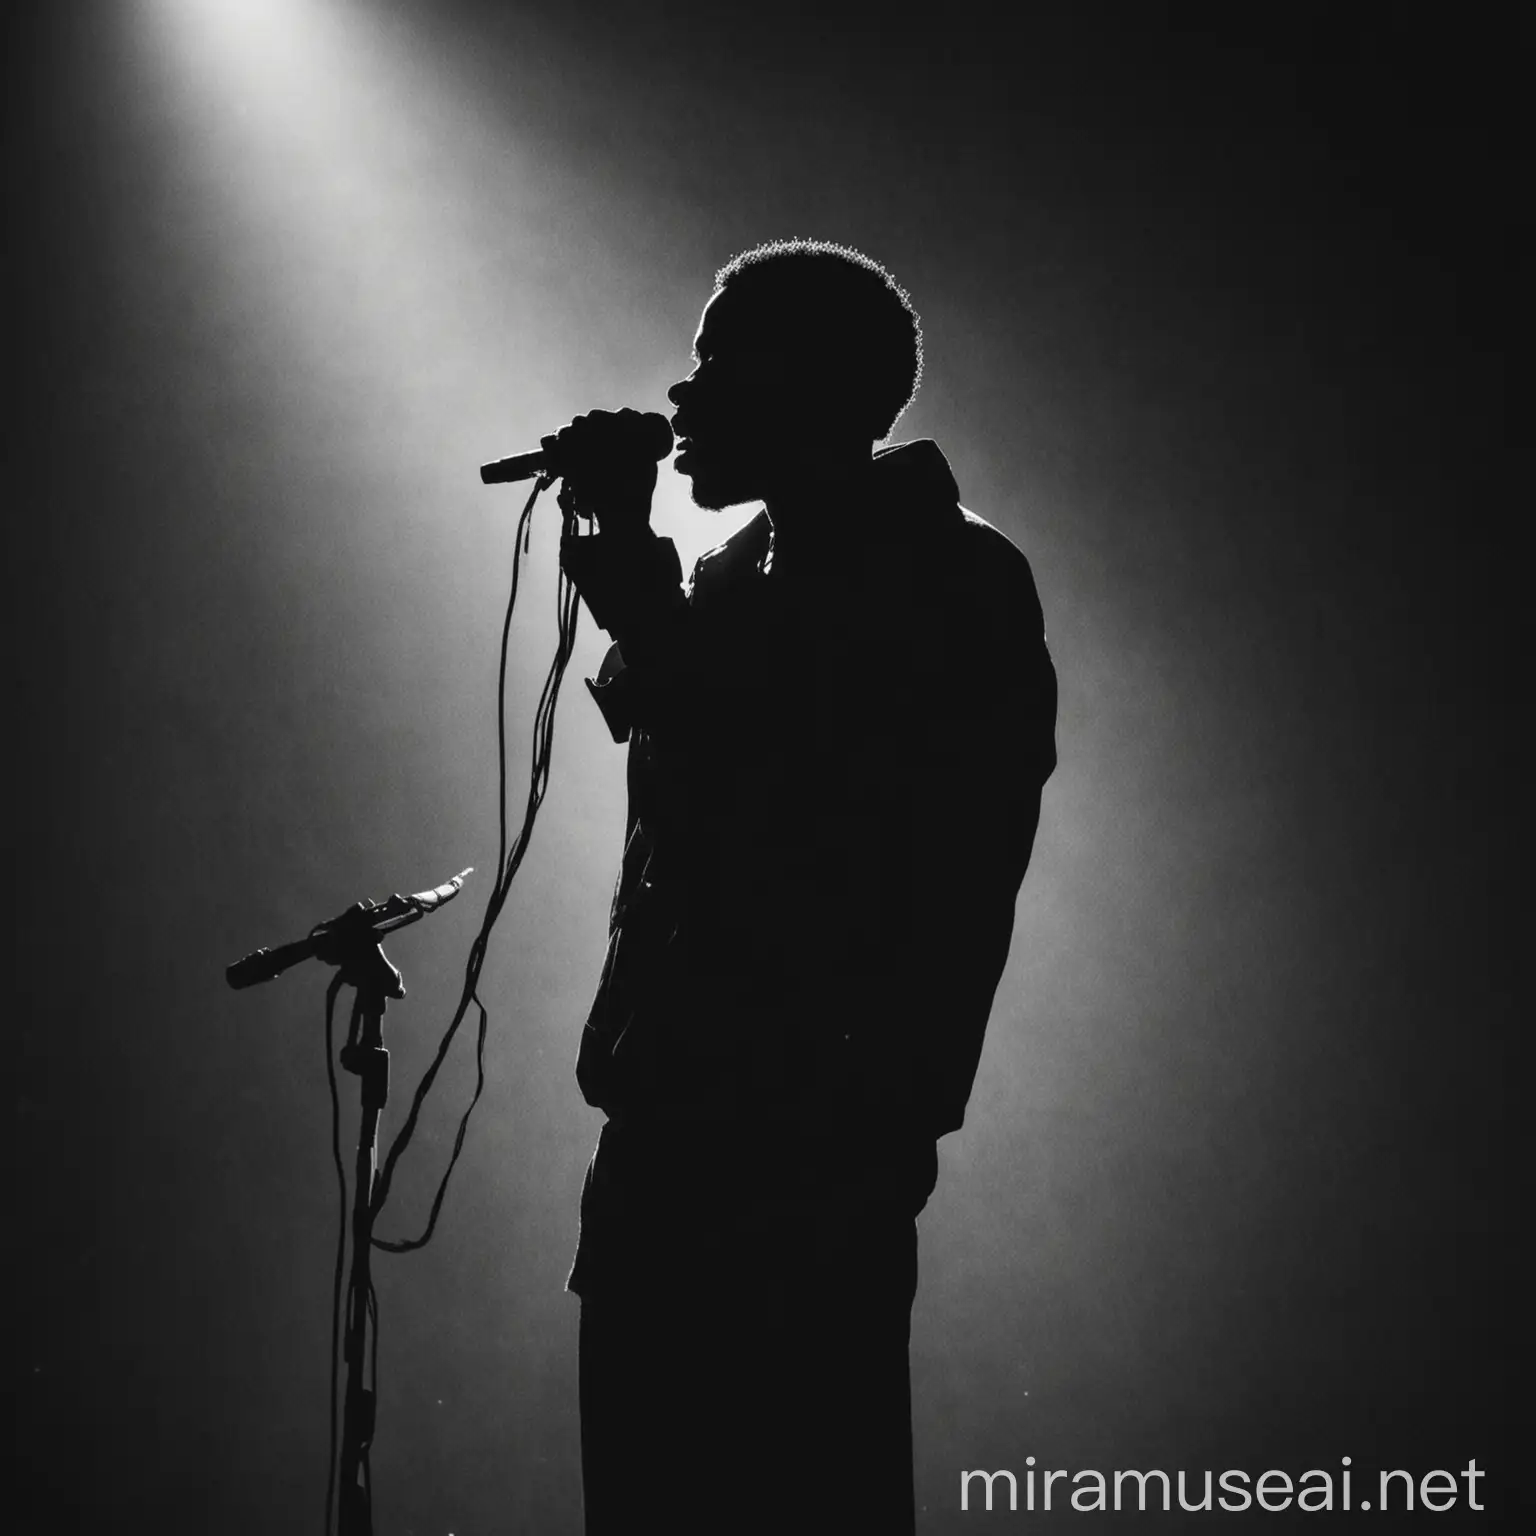 Silhouette of a Black Man Singing with a Microphone